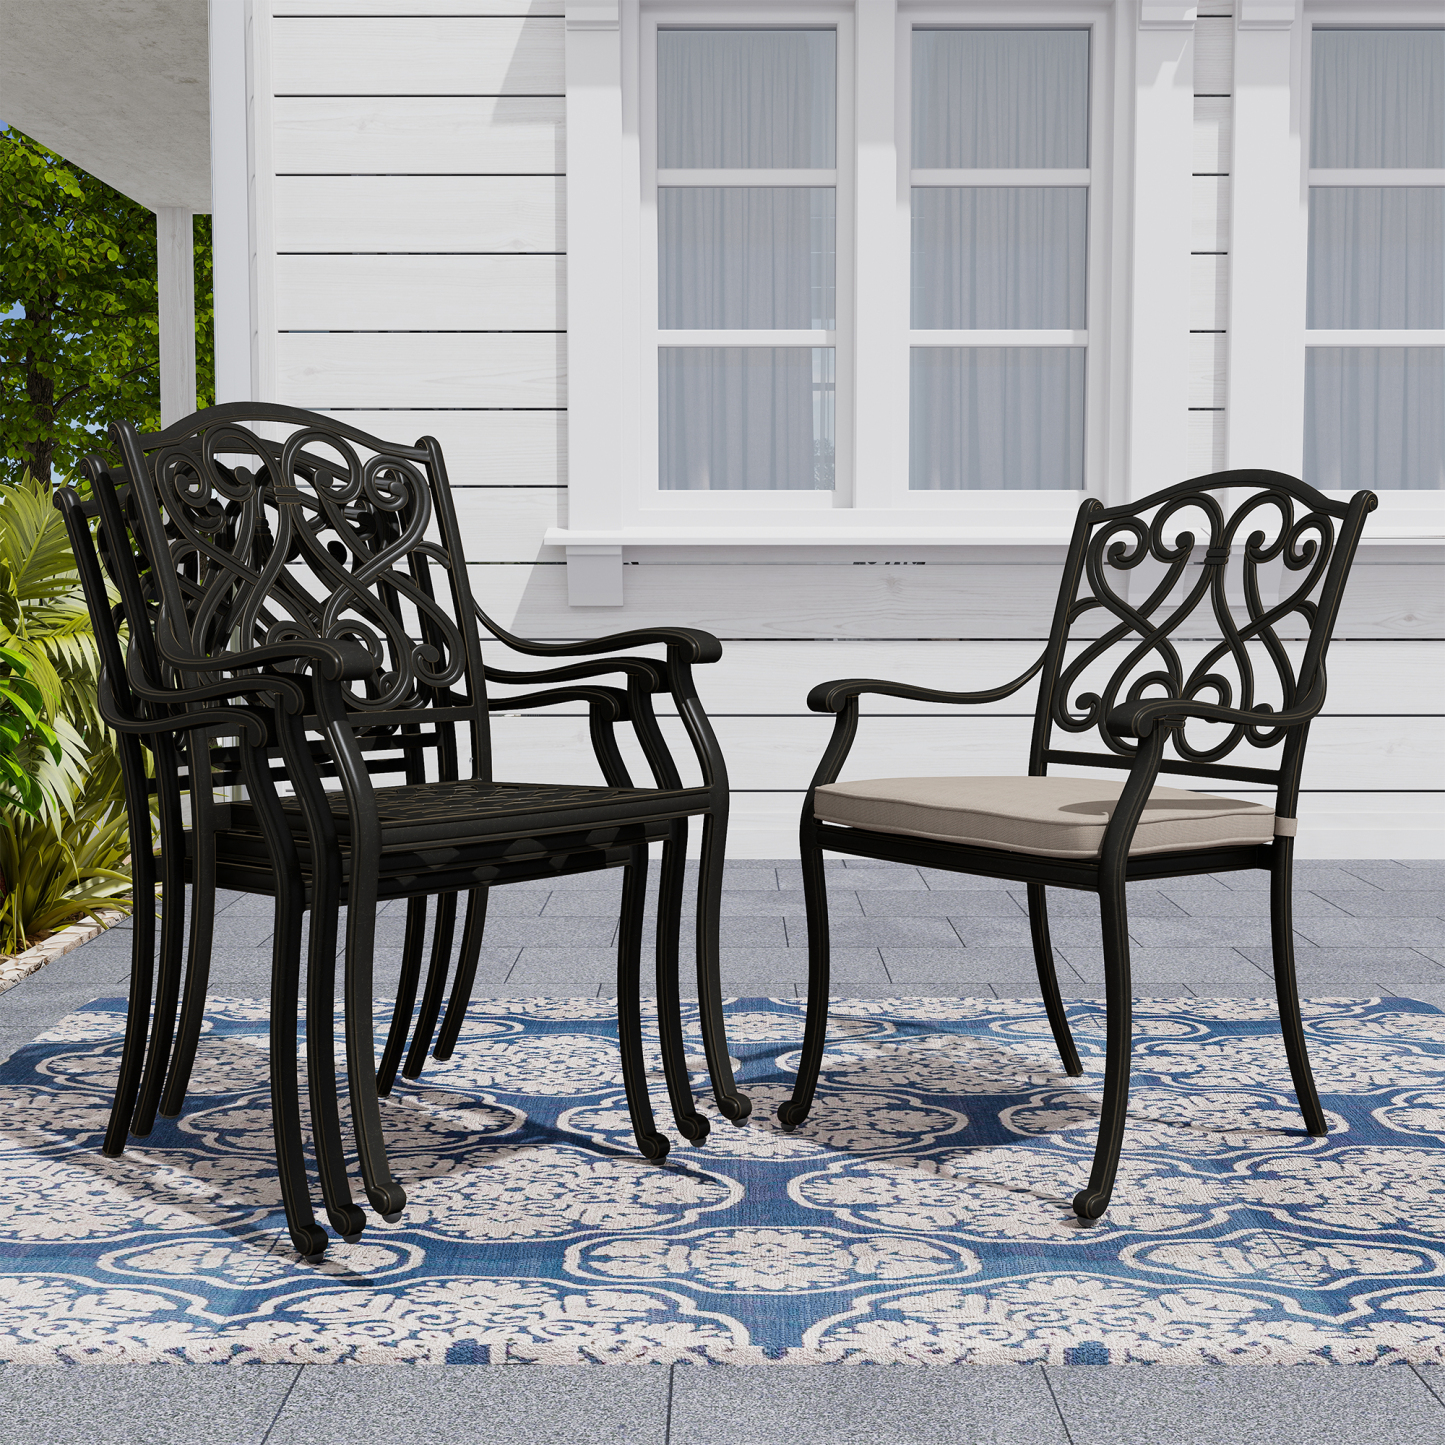 7-Piece Cast Aluminum Outdoor Dining Set with 1 Rectangle Extendable Table 4 Dining Chairs 2 Swivel Rockers with Cushion